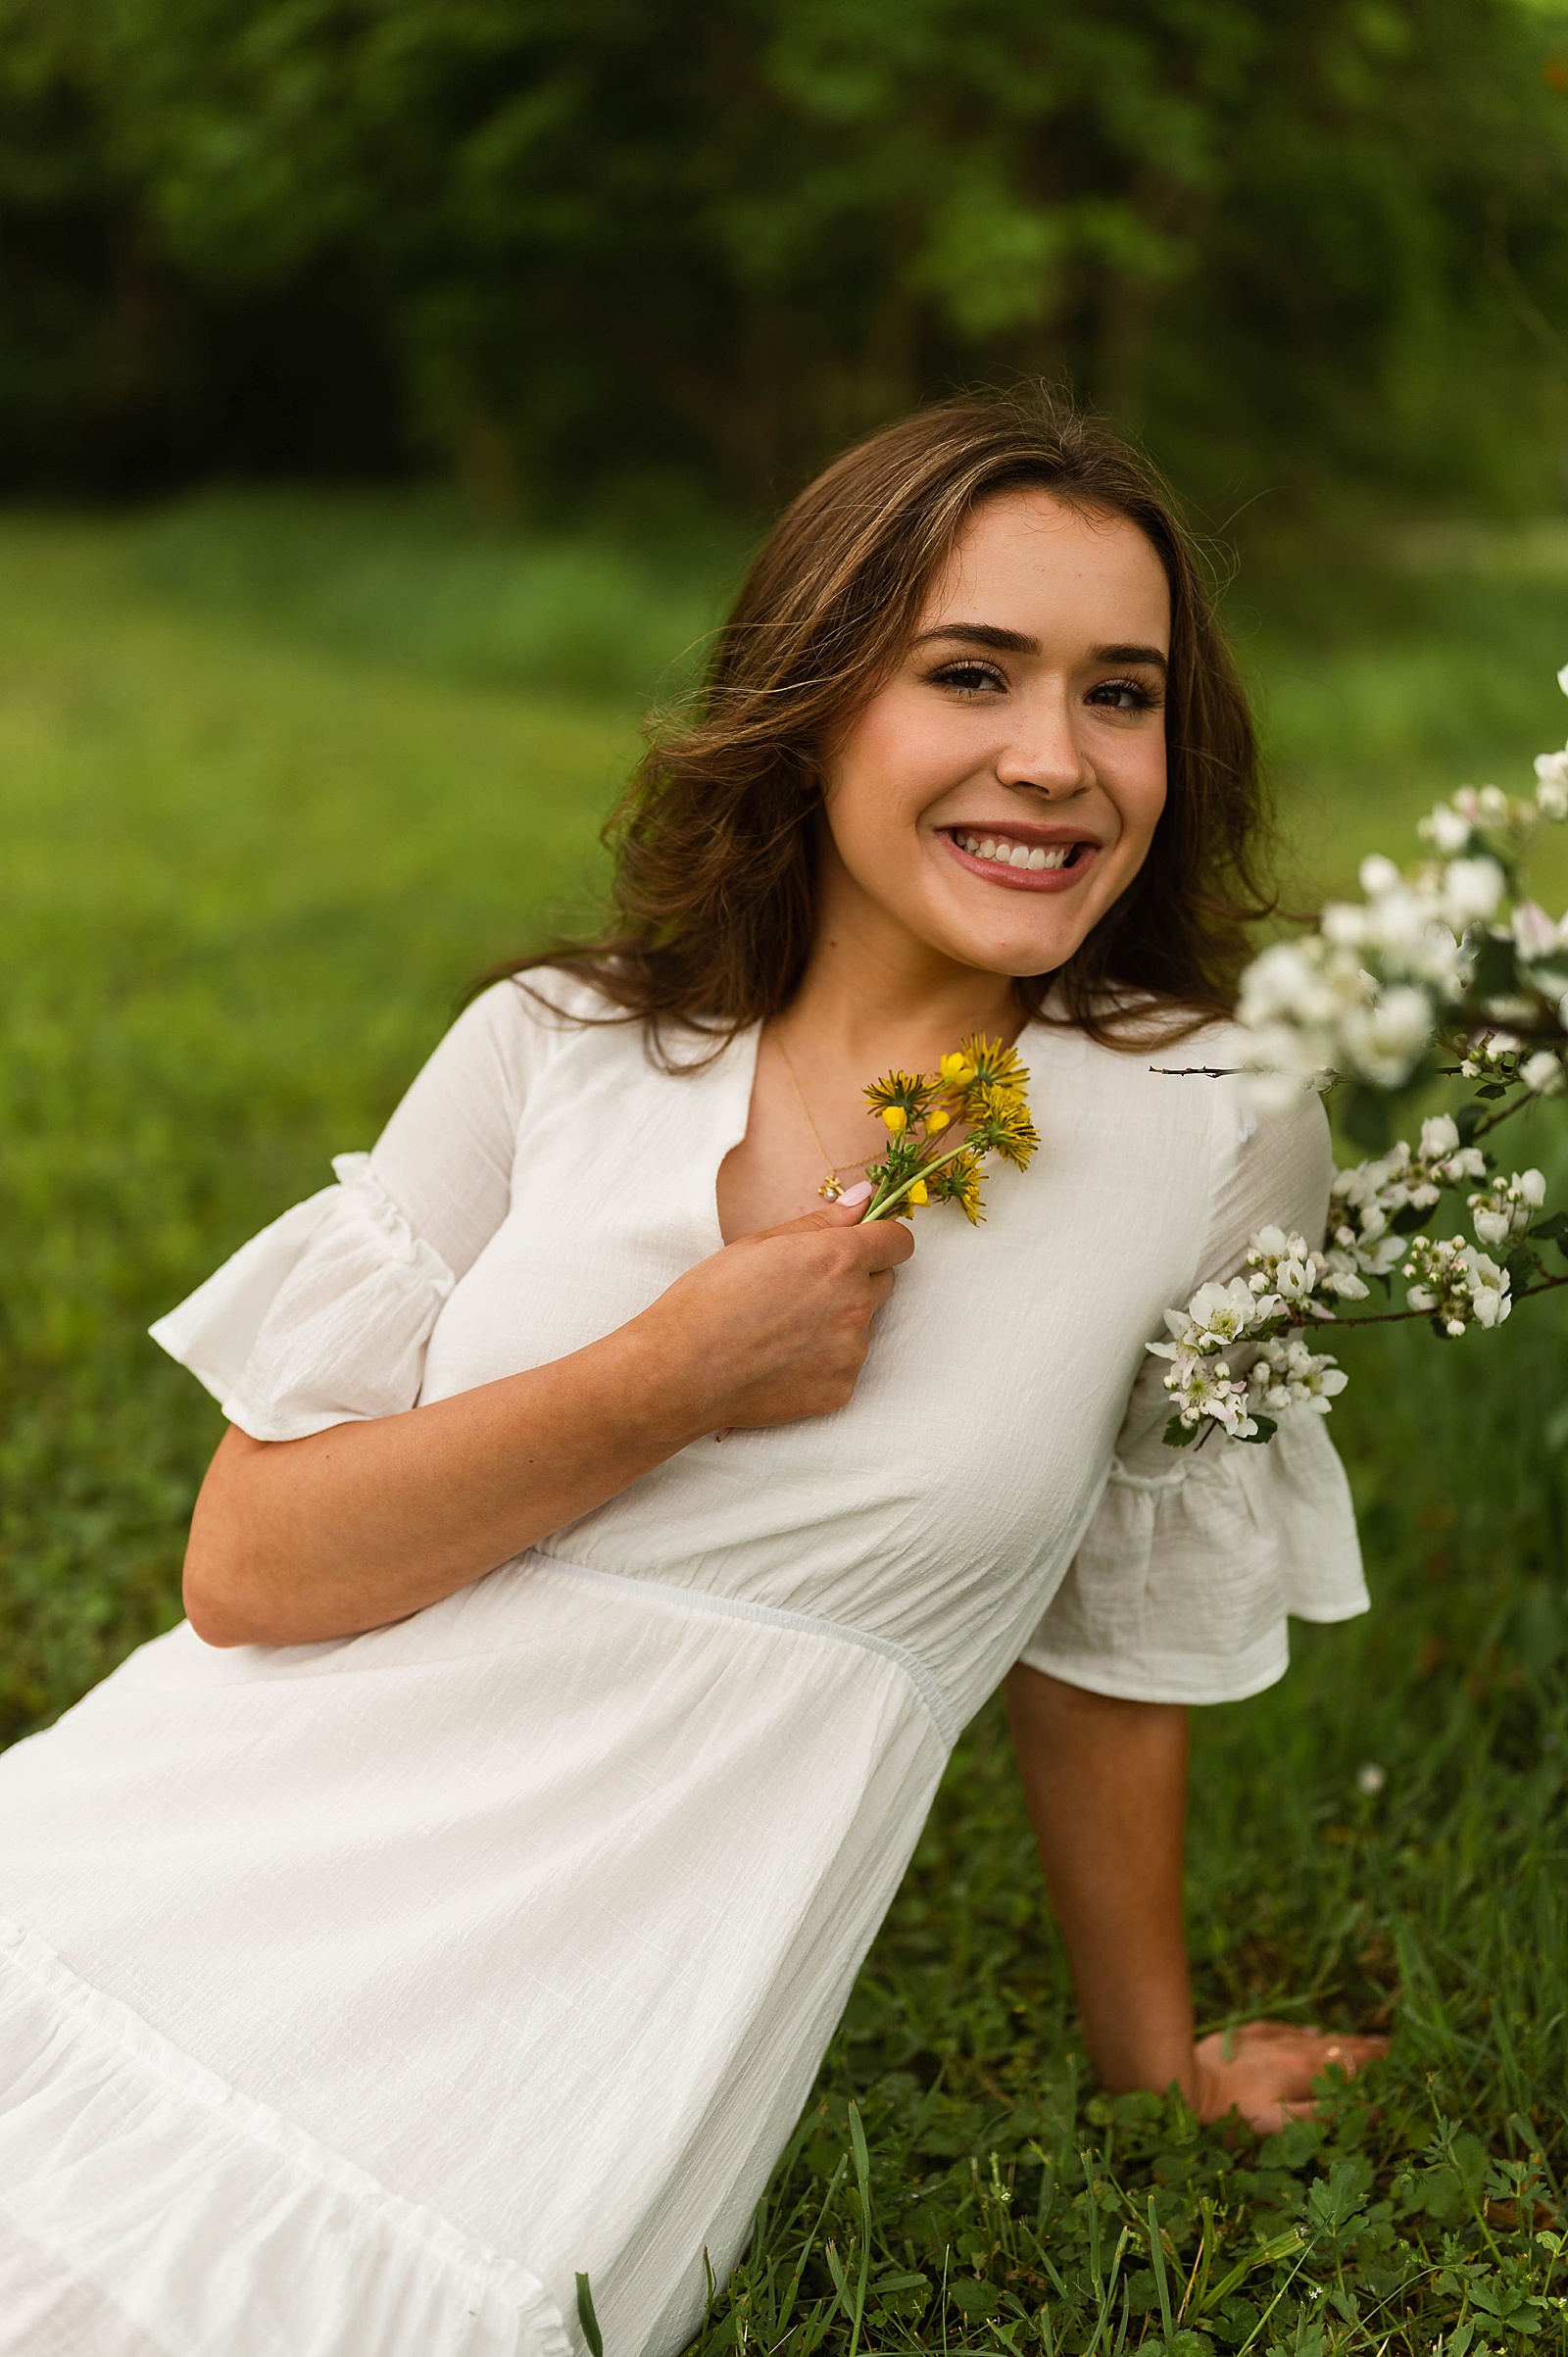 Senior holding blossoms in a field for Spring Flowers portraits